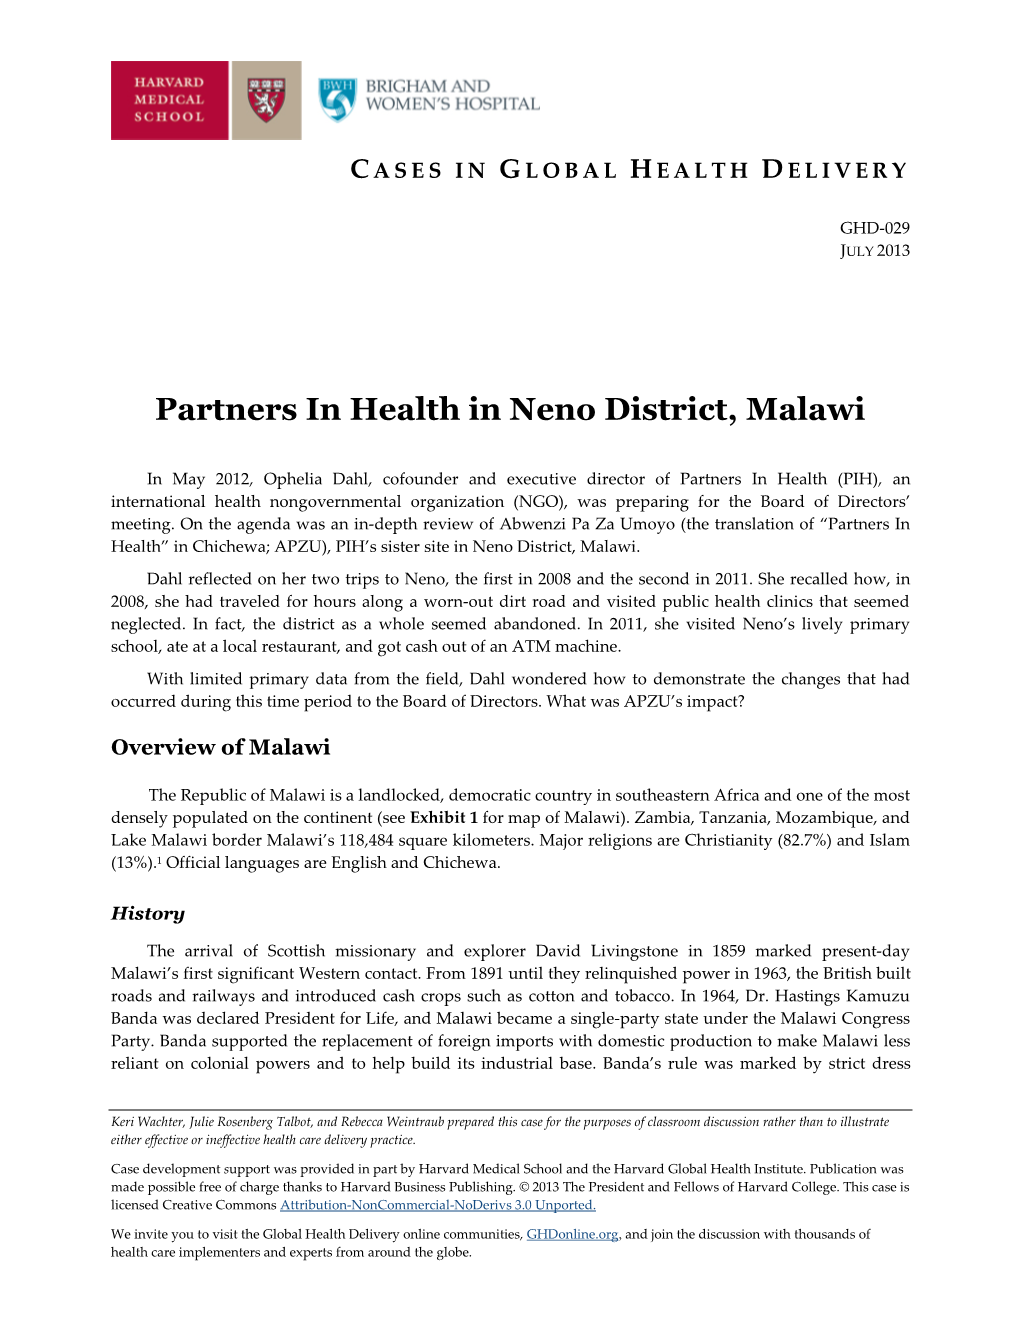 Partners in Health in Neno District, Malawi